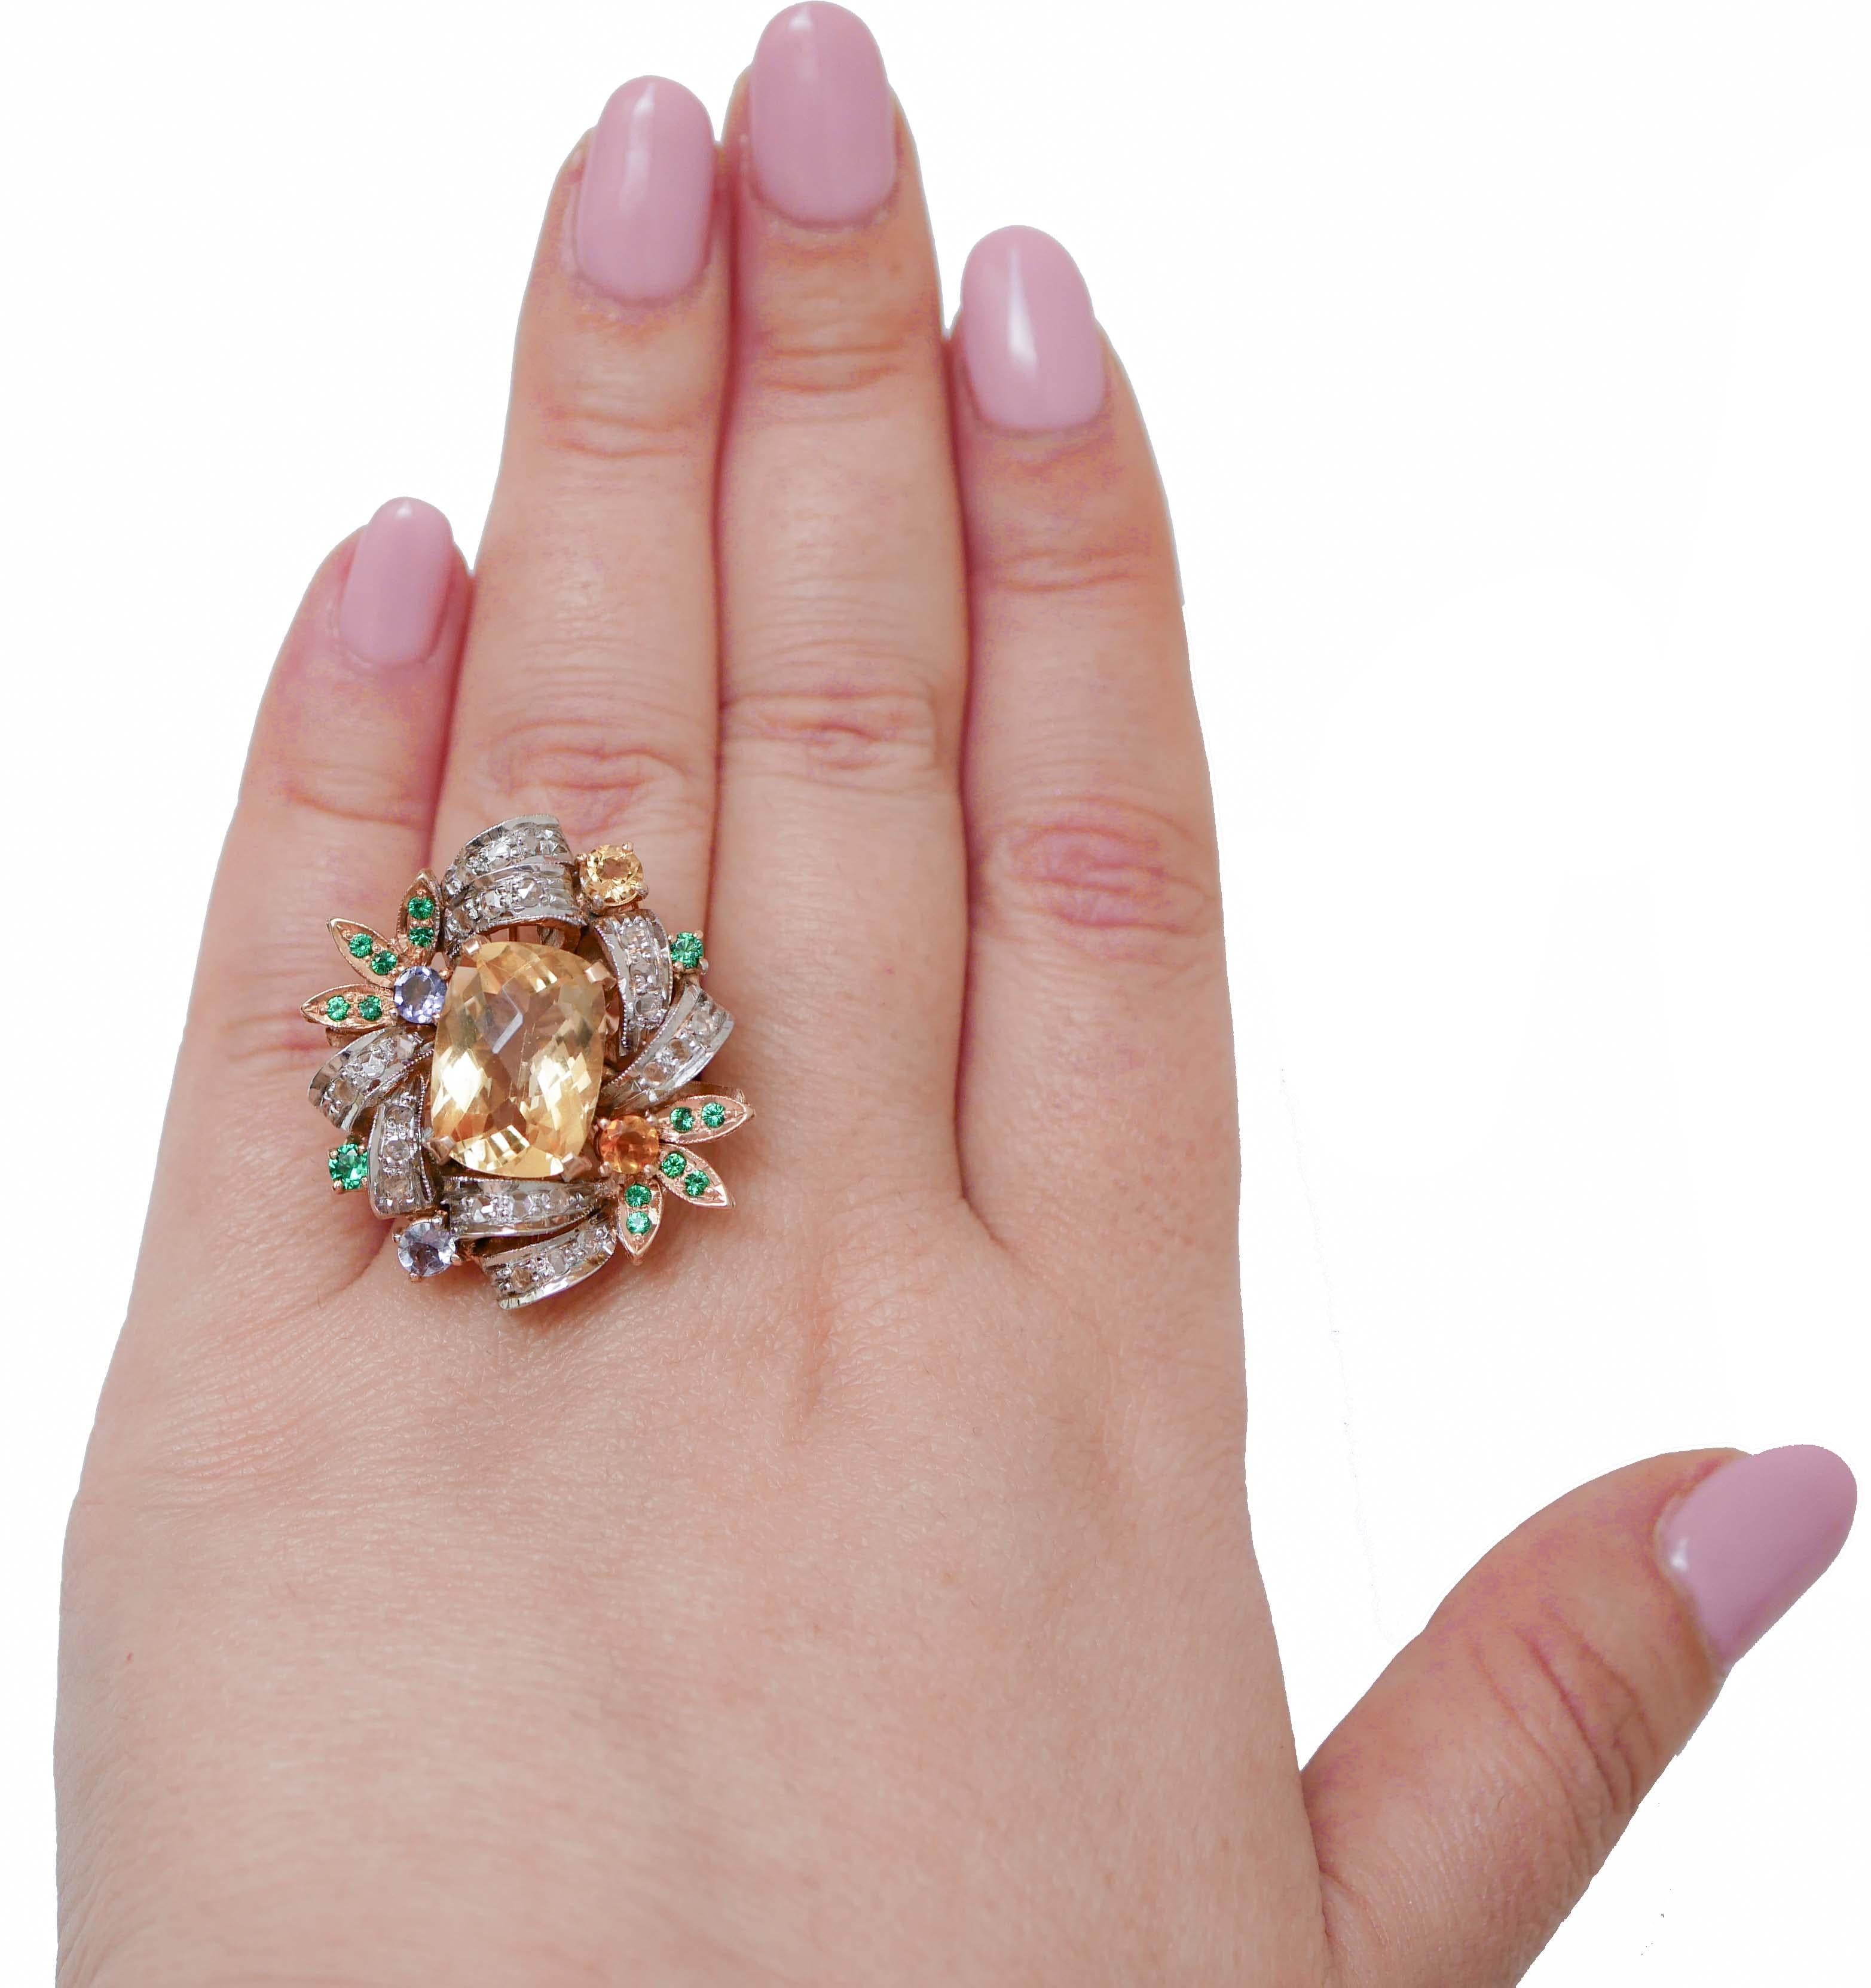 Mixed Cut Topazs, Tanzanite, Stones, Diamonds, 14 Karat Rose Gold and Silver Ring. For Sale